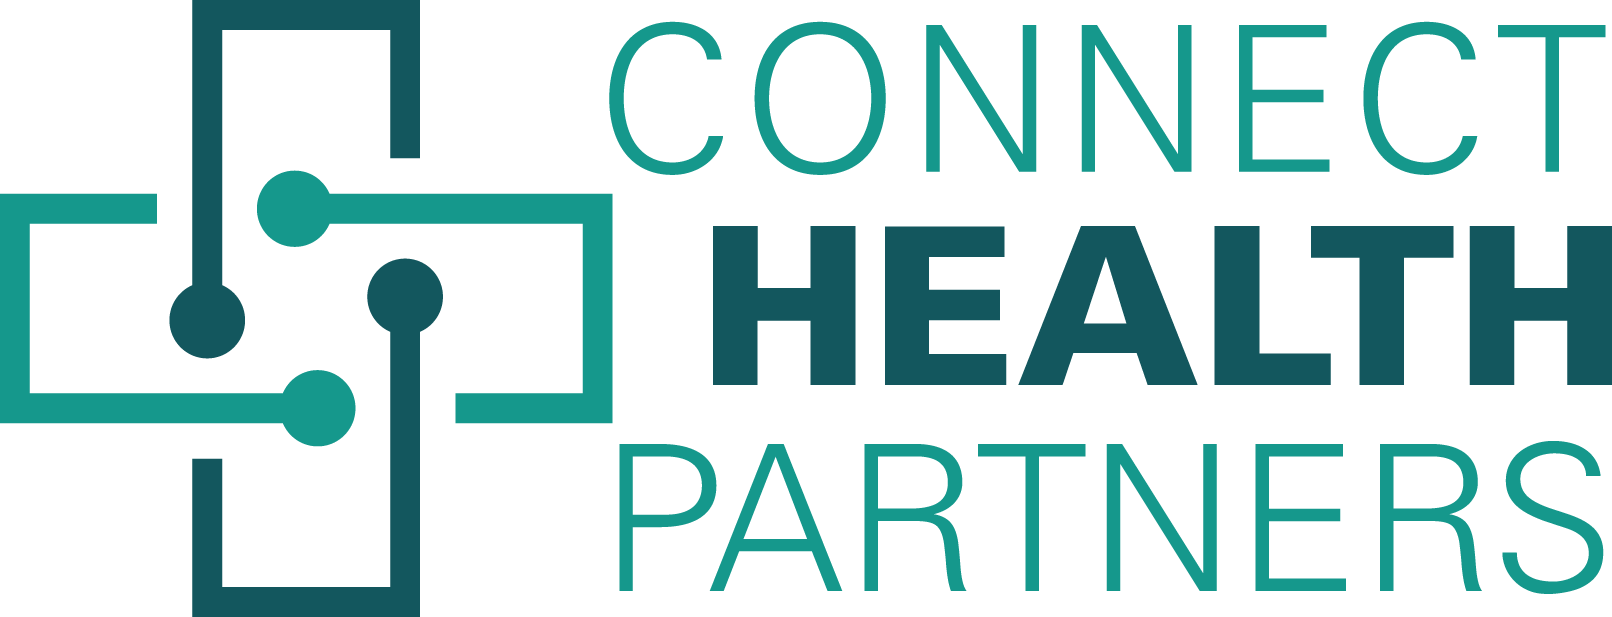 Connect Health Partners